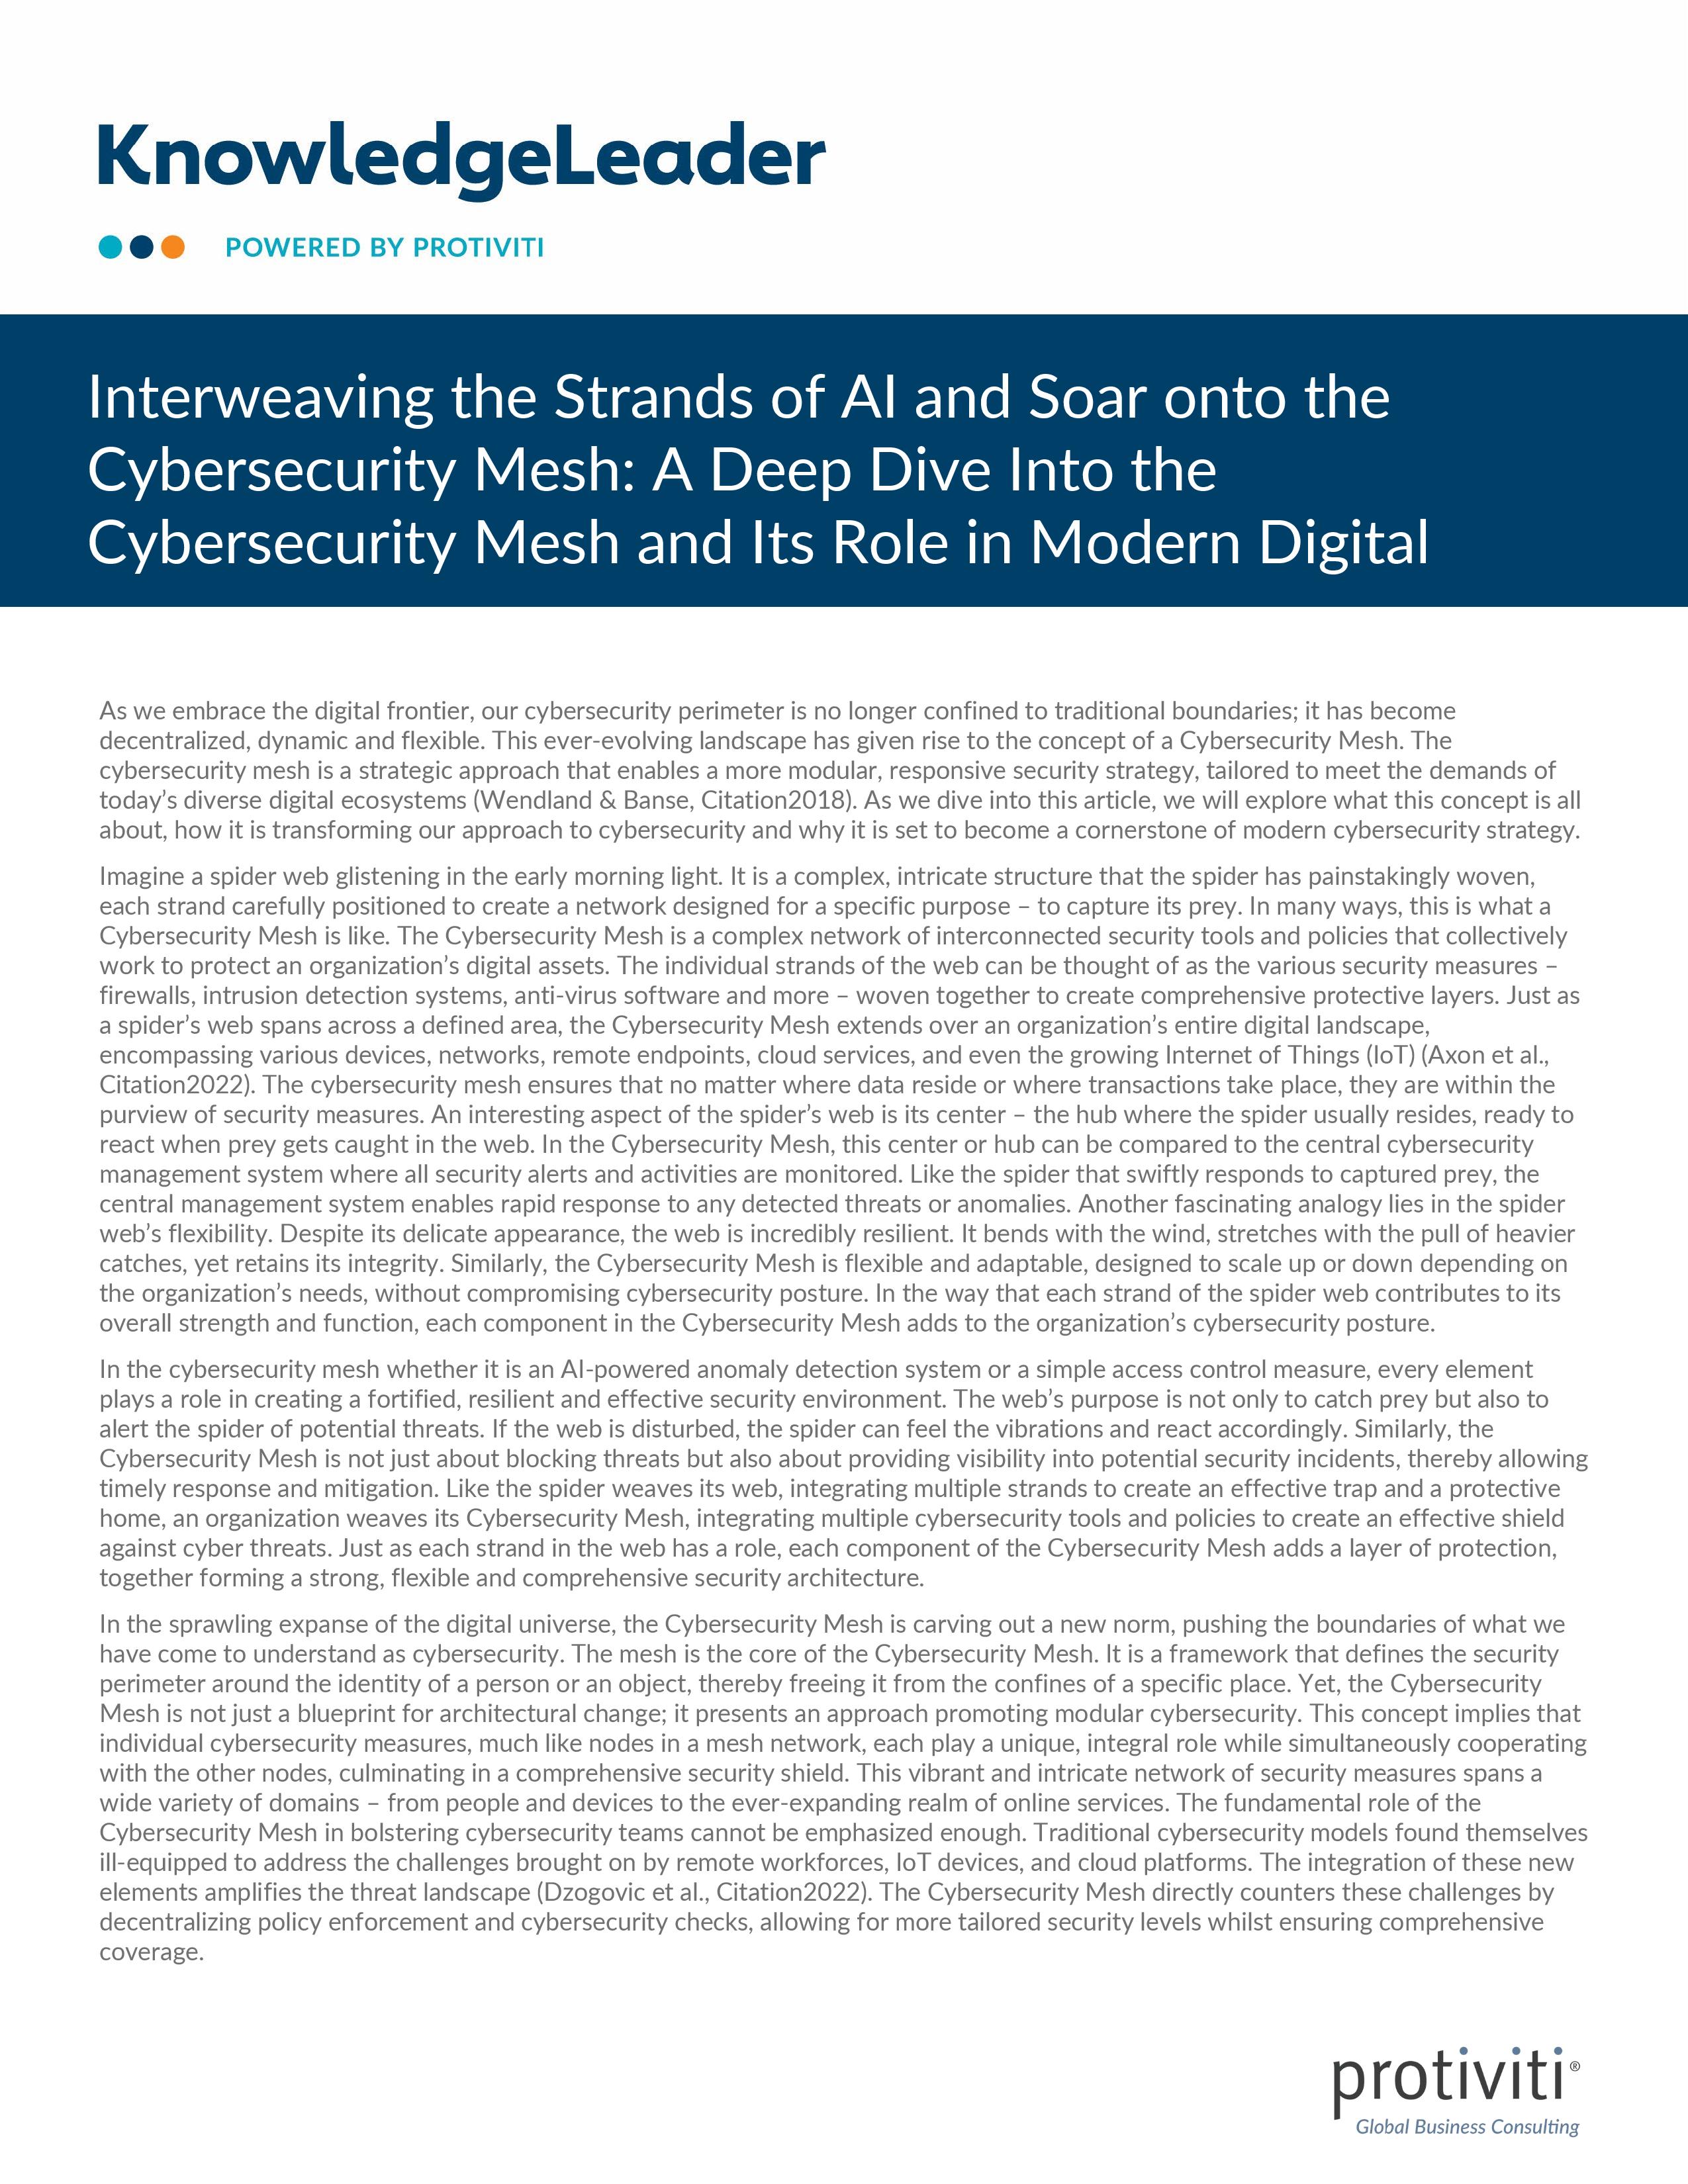 screenshot of the first page of Interweaving the Strands of AI and Soar onto the Cybersecurity Mesh